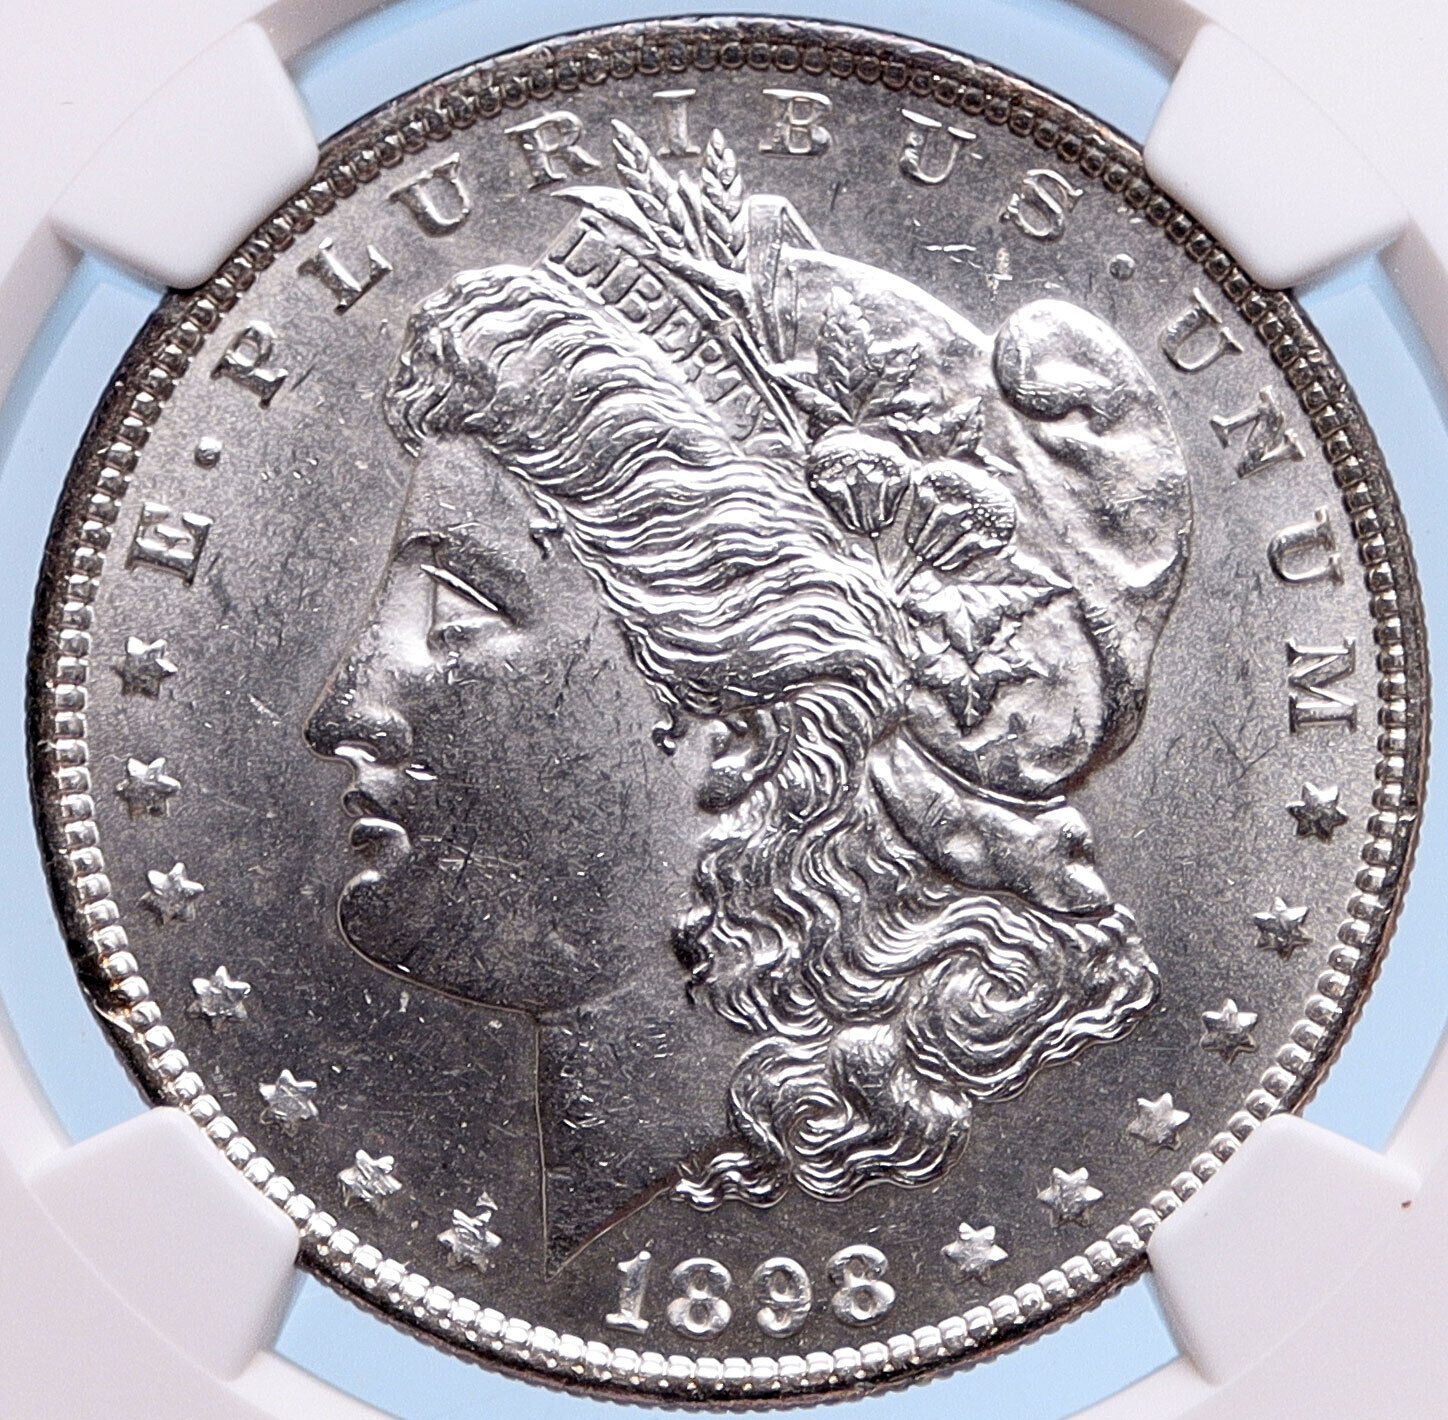 1898 MORGAN SILVER DOLLAR United States of America USA Coin NGC MS 62 i57739